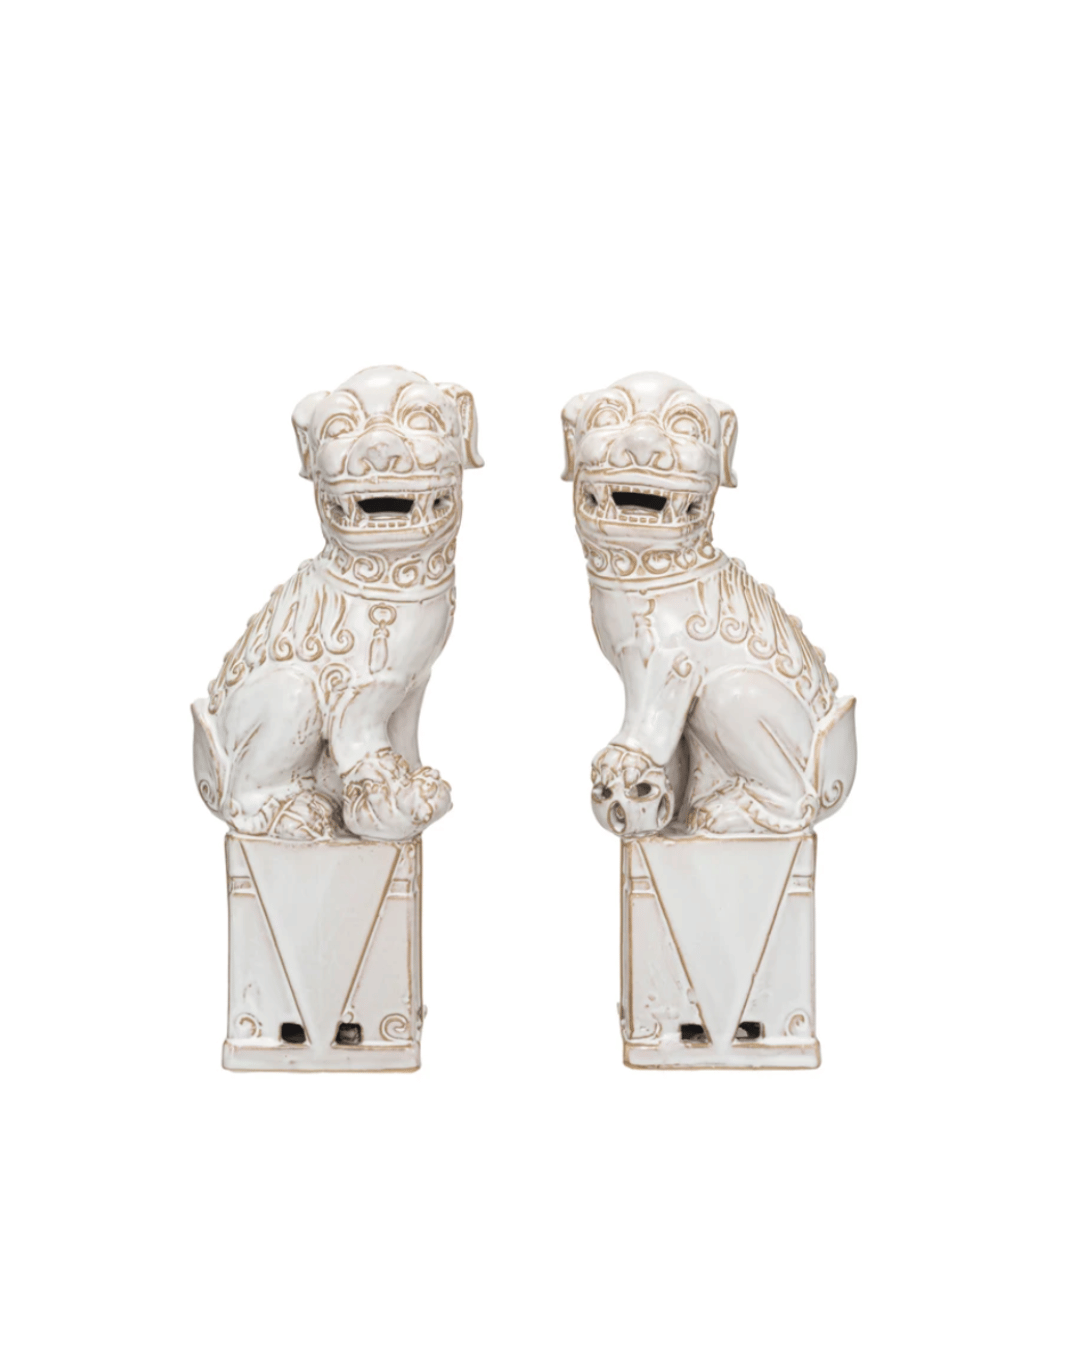 Two white porcelain Creative Co-op Foo Dog Bookends S/2, also known as Foo Dogs, depicted in seated positions on ornate rectangular pedestals at a bungalow in Scottsdale Arizona, facing forward with detailed carvings and embellishments.